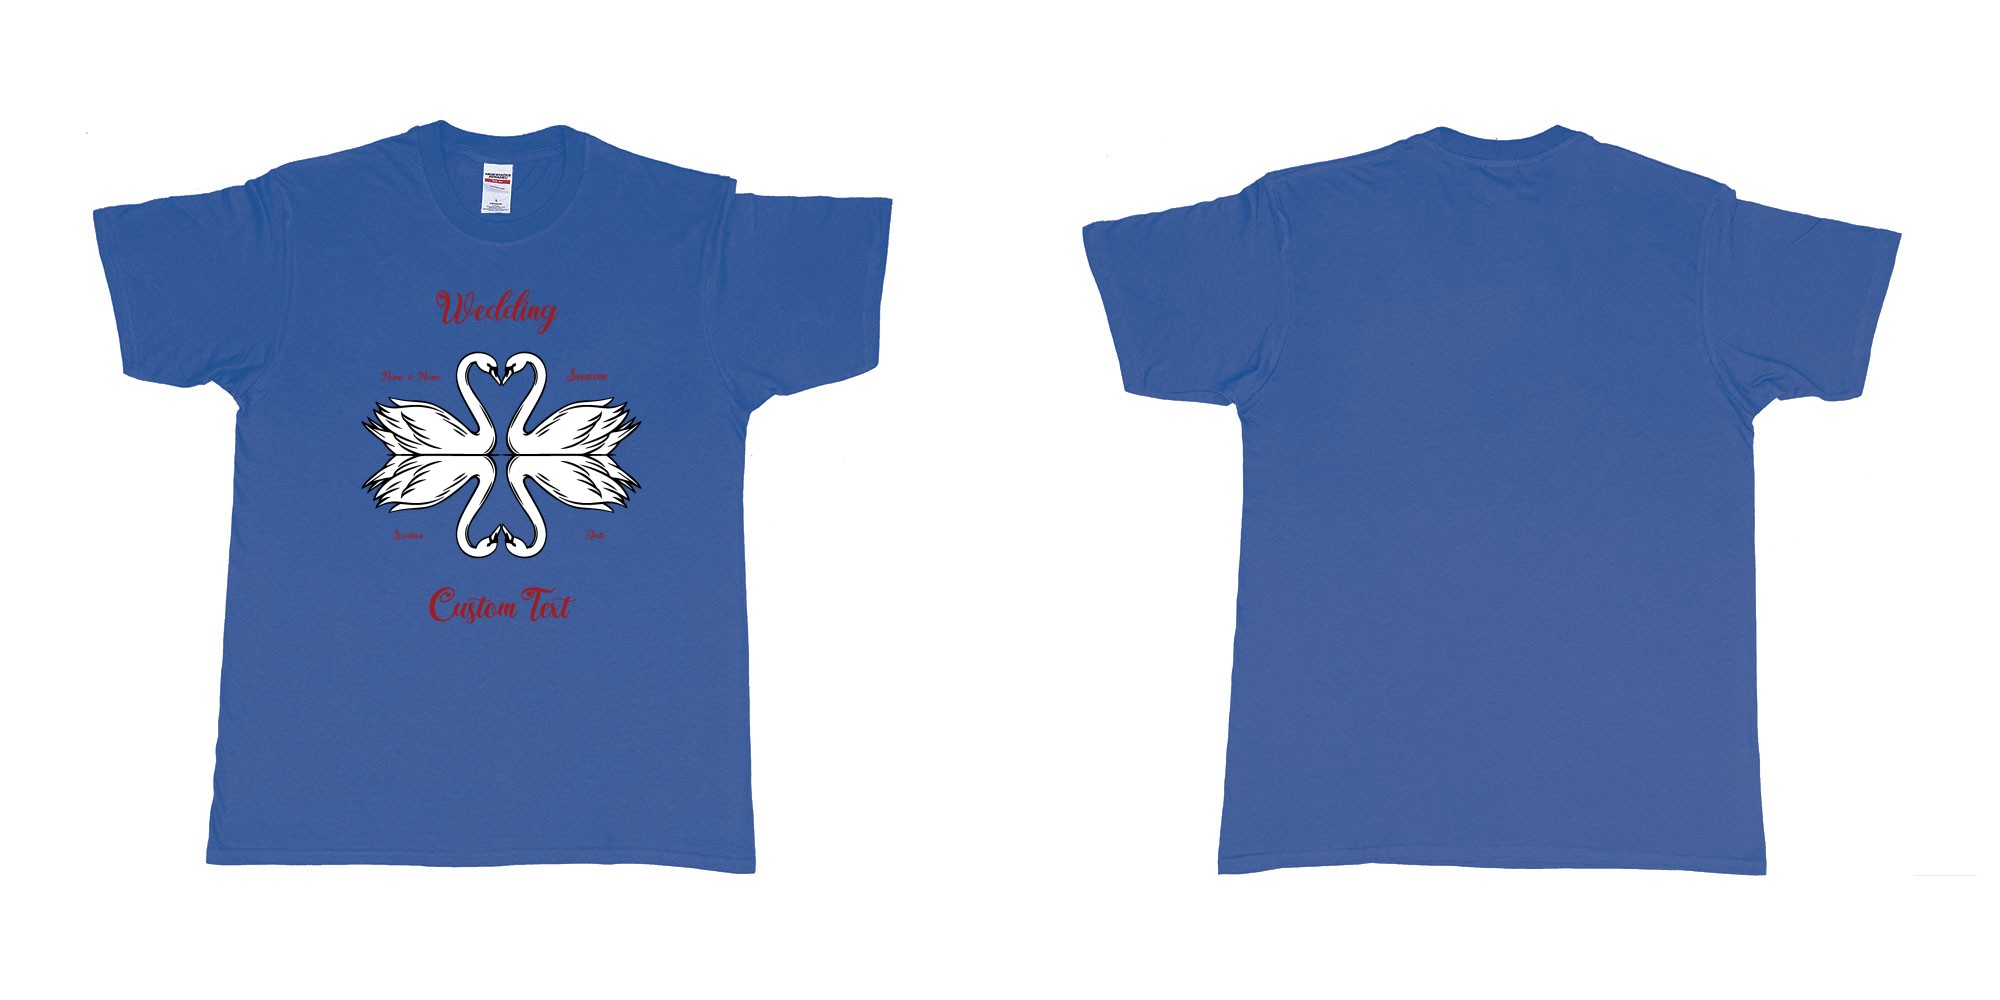 Custom tshirt design swans hearts reflection in fabric color royal-blue choice your own text made in Bali by The Pirate Way